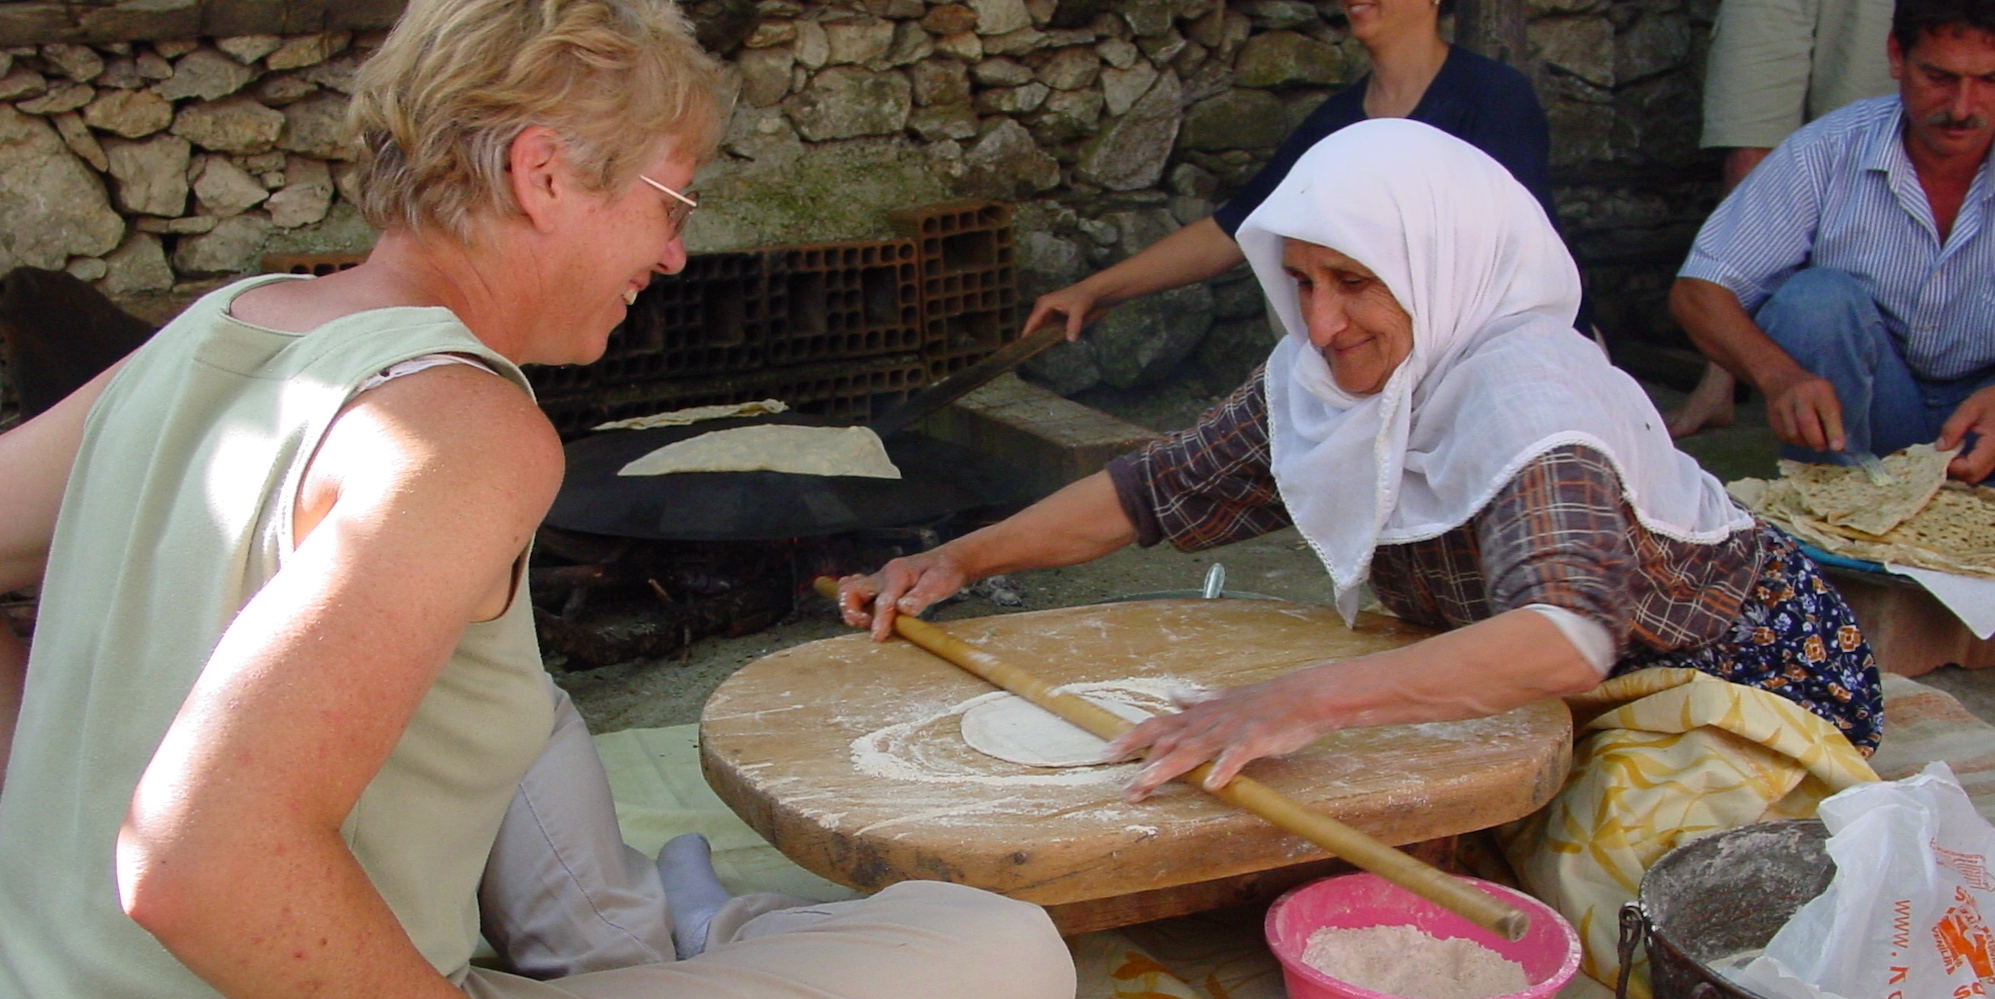 Turkish woman teaching an American woman how to make a traditional turkish meal